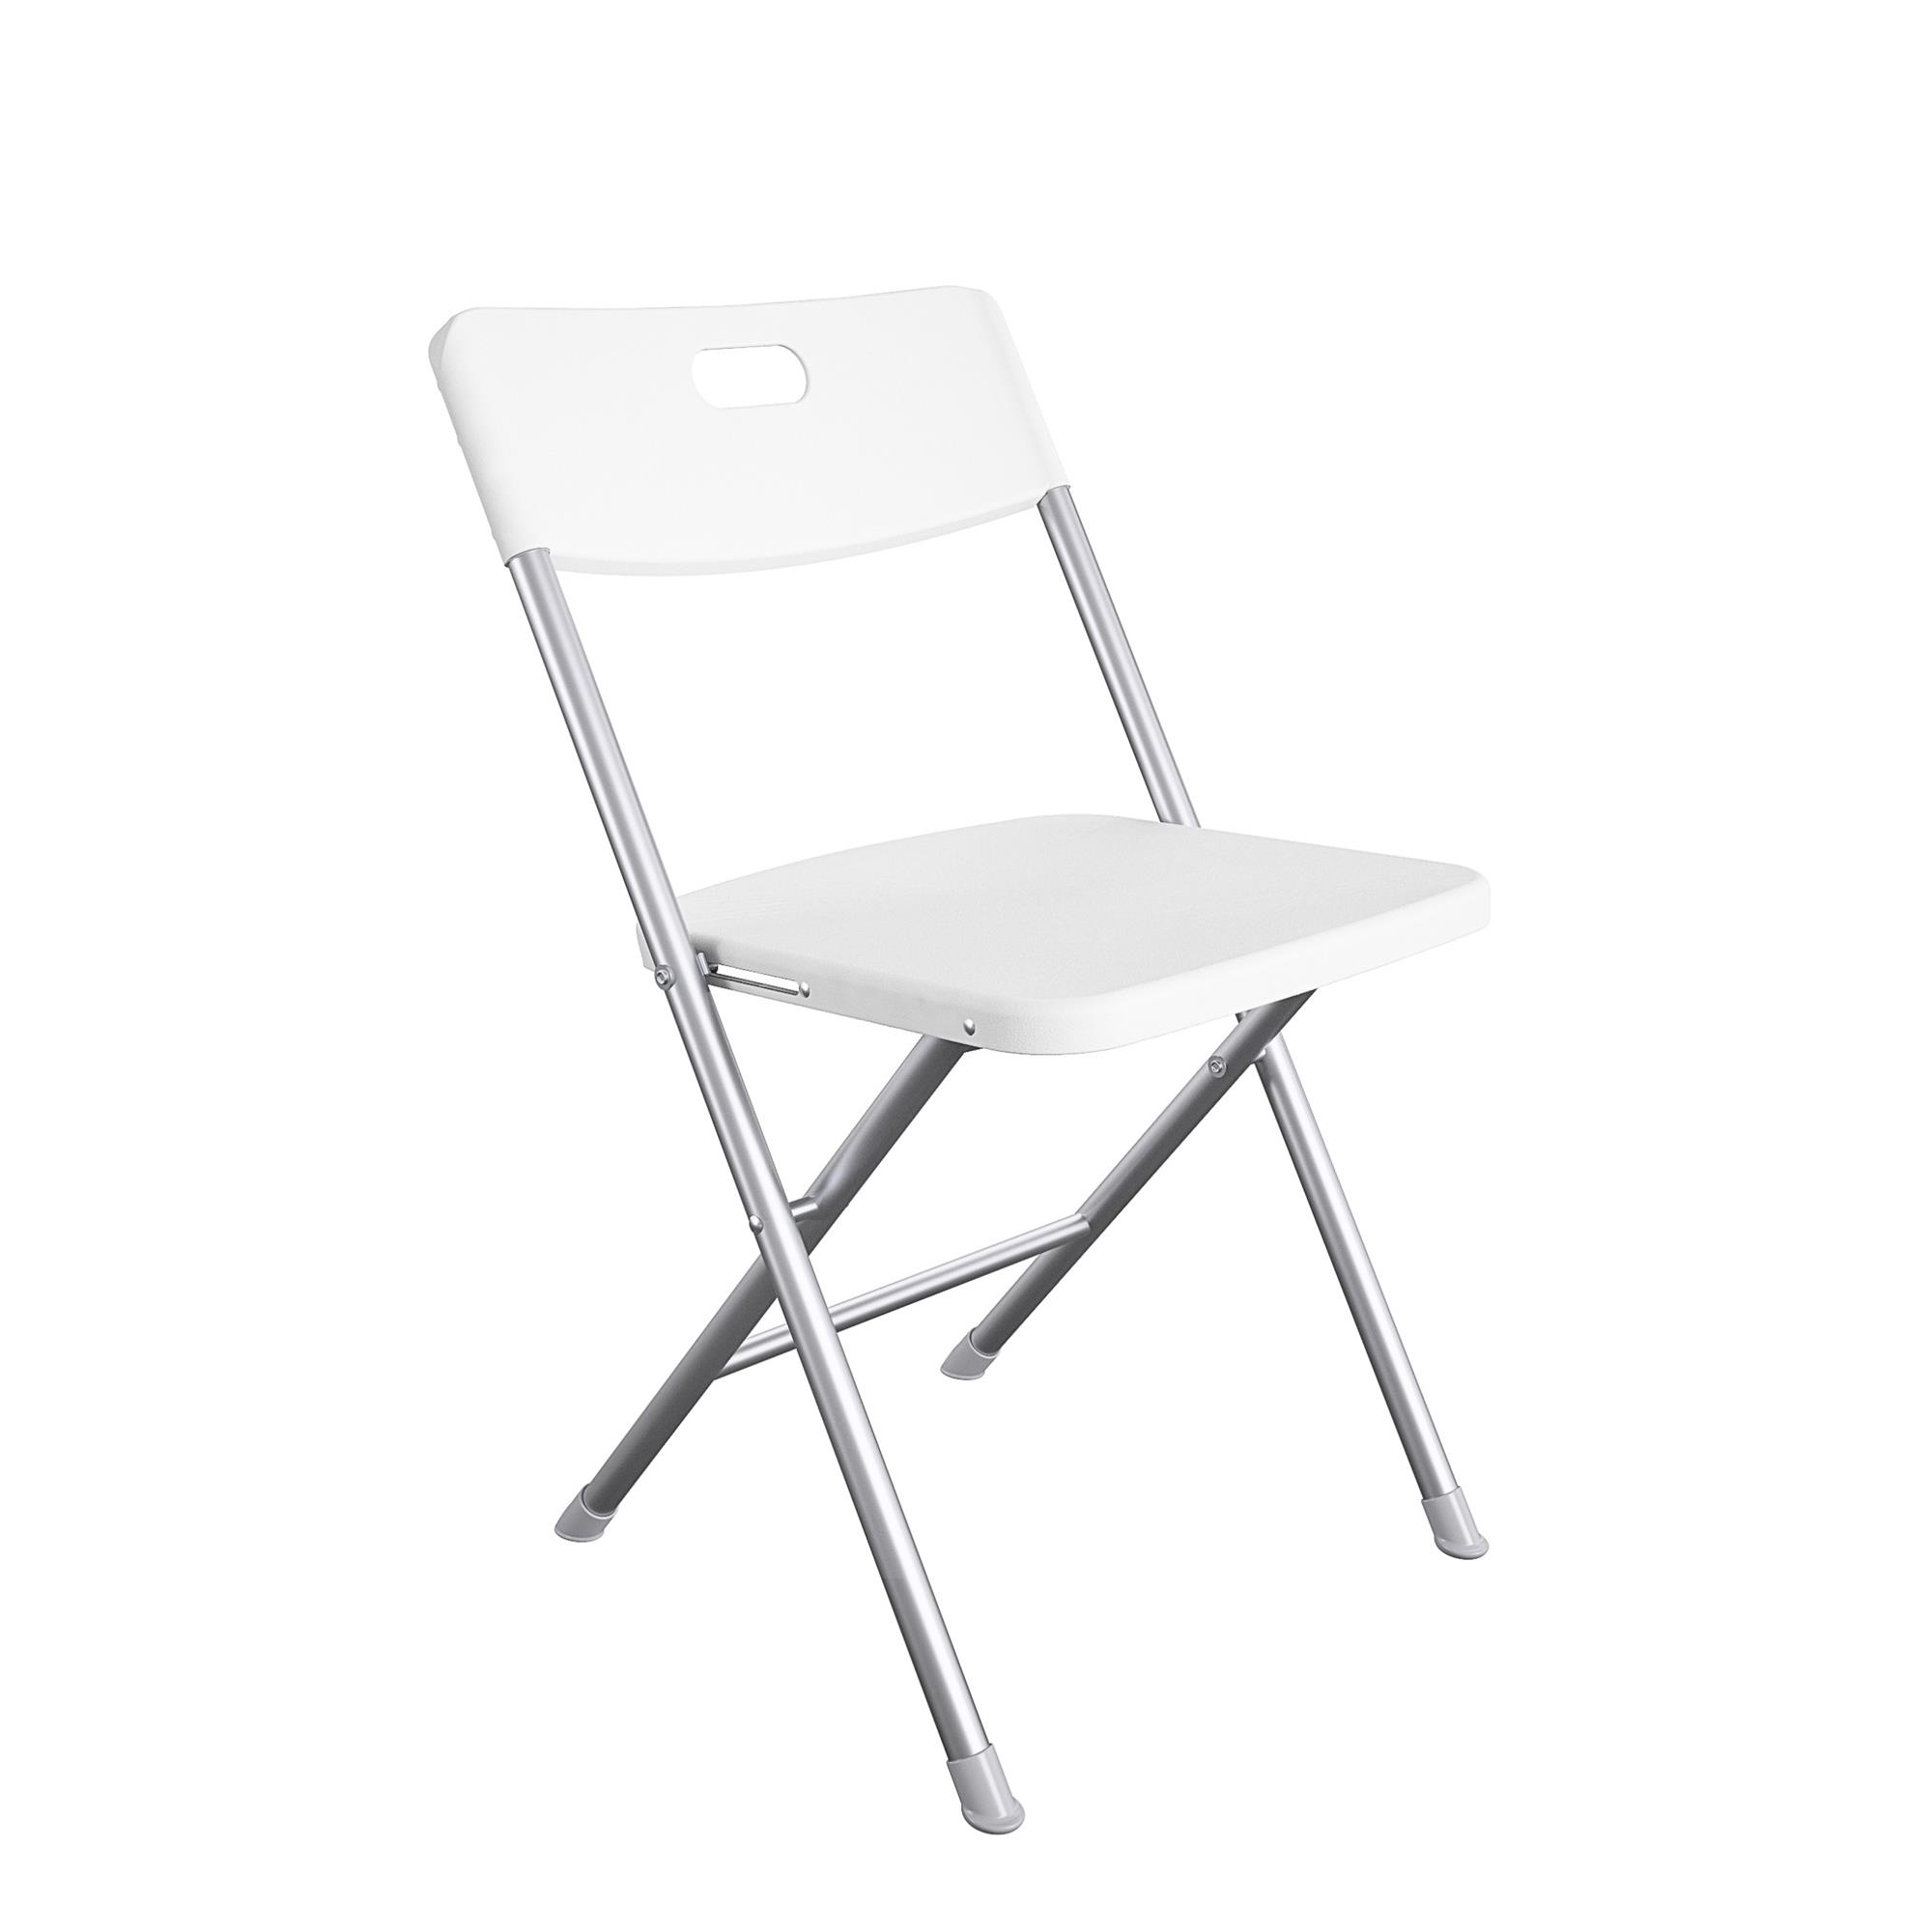 Mainstays Resin Seat & Back Folding Chair, White - image 1 of 7